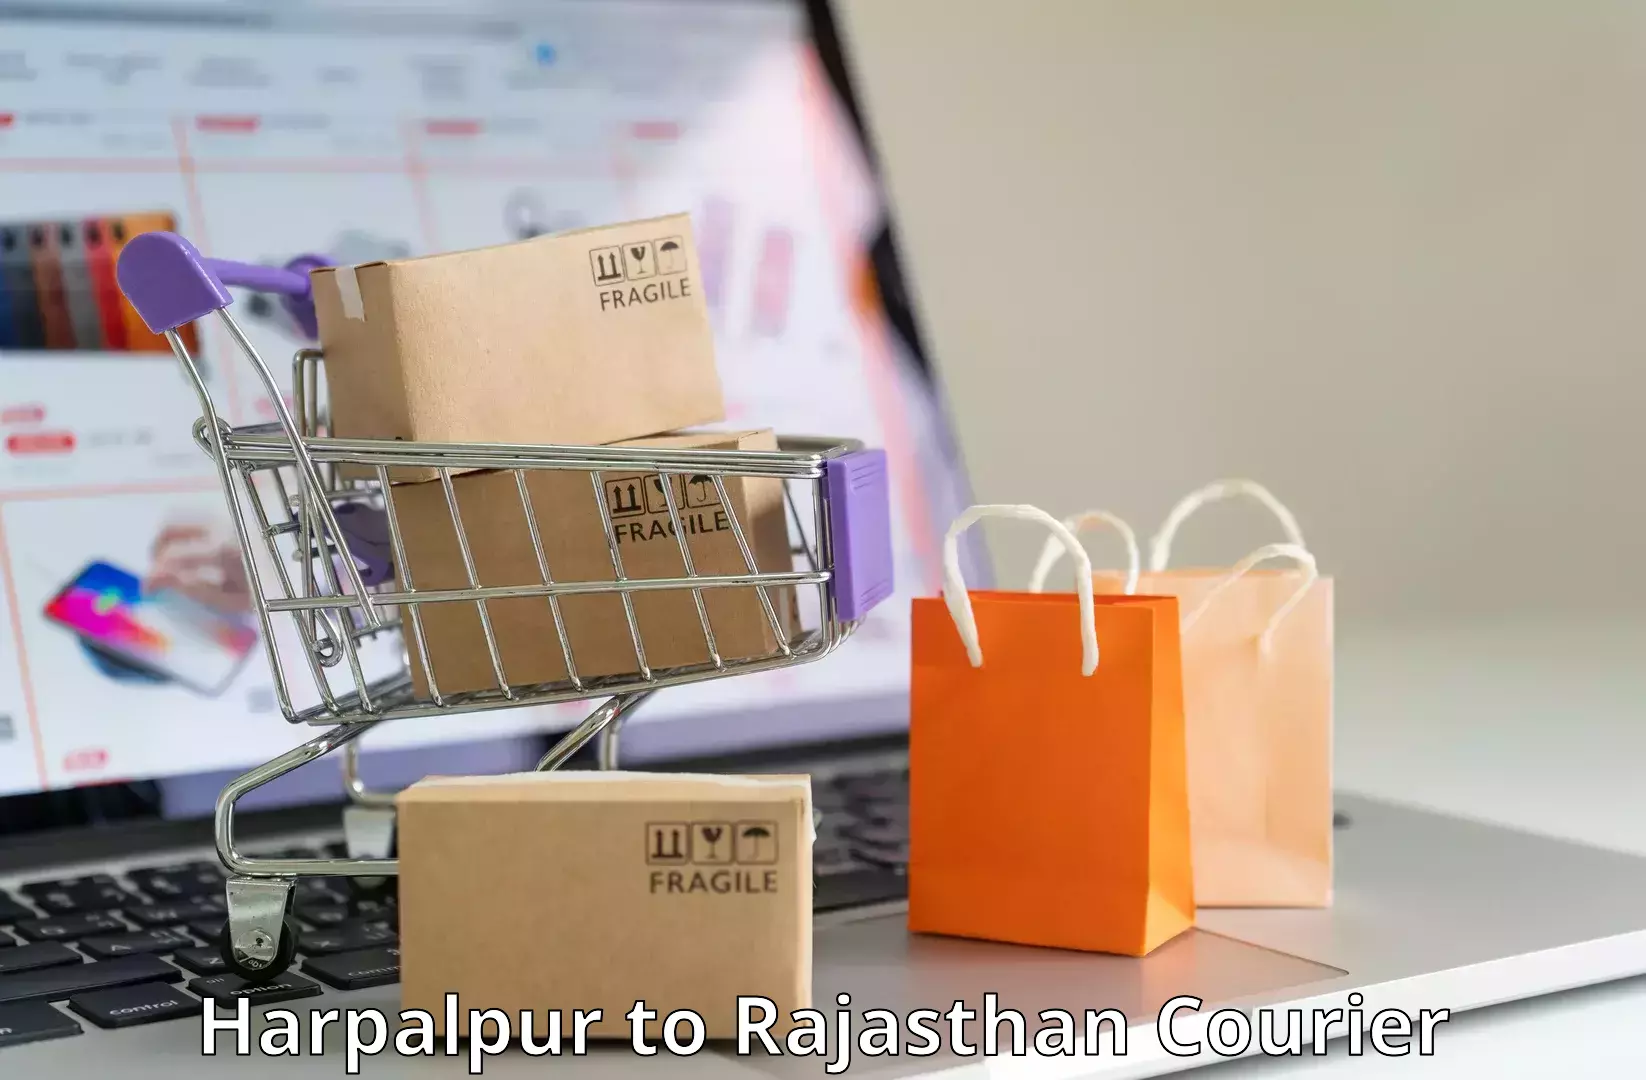 Courier service partnerships Harpalpur to Sojat